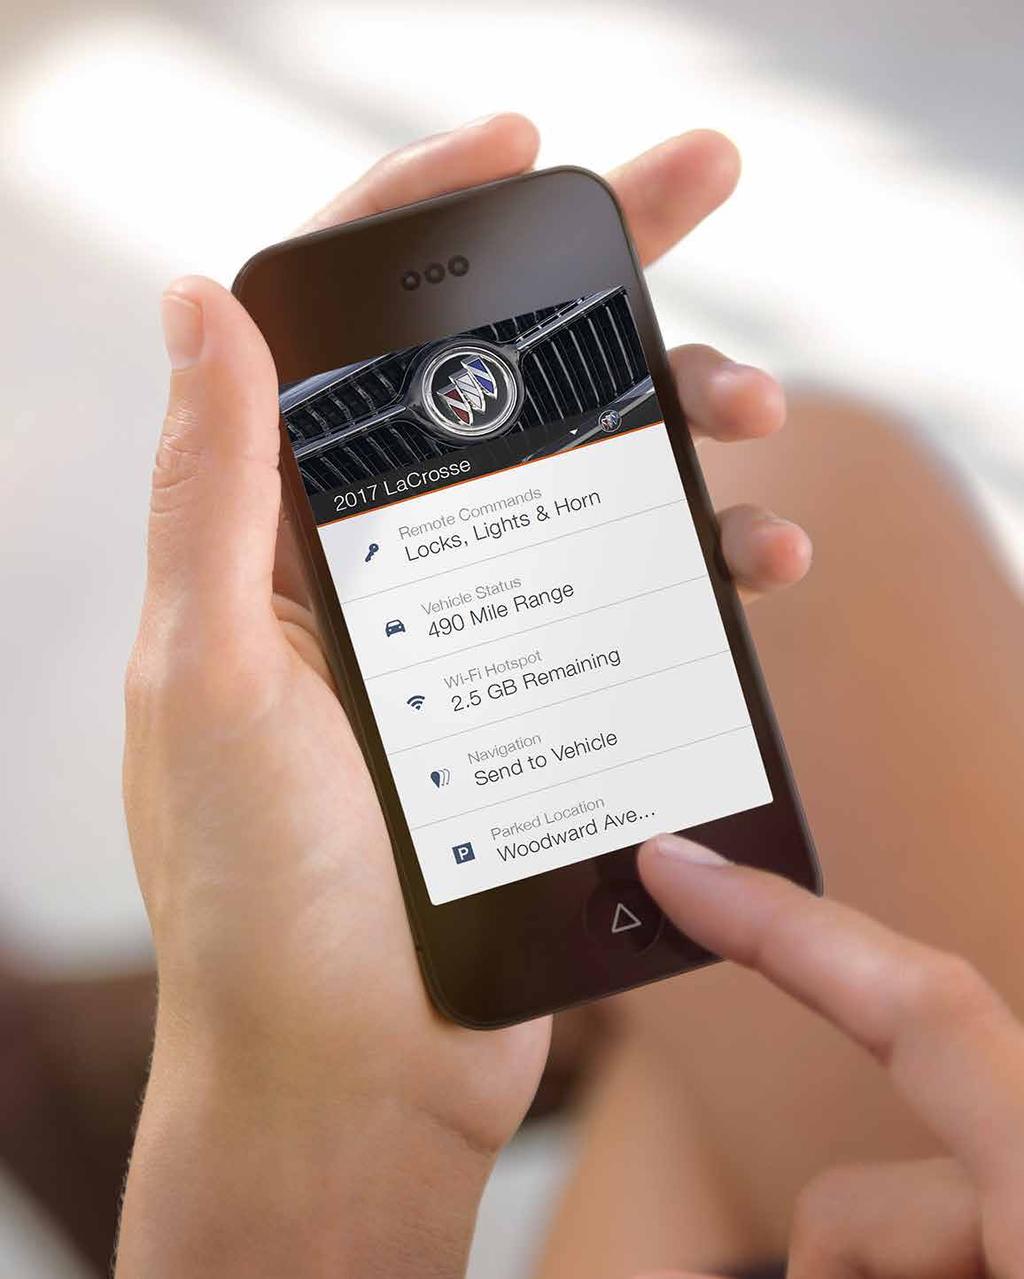 ONSTAR THE INCLUDED ONSTAR GUIDANCE PLAN1 SERVICE TRIAL (TRIAL EXCLUDES HANDS-FREE CALLING MINUTES) LETS YOU CONNECT TO A SPECIALLY TRAINED ONSTAR ADVISOR JUST BY PUSHING THE BLUE ONSTAR BUTTON IN